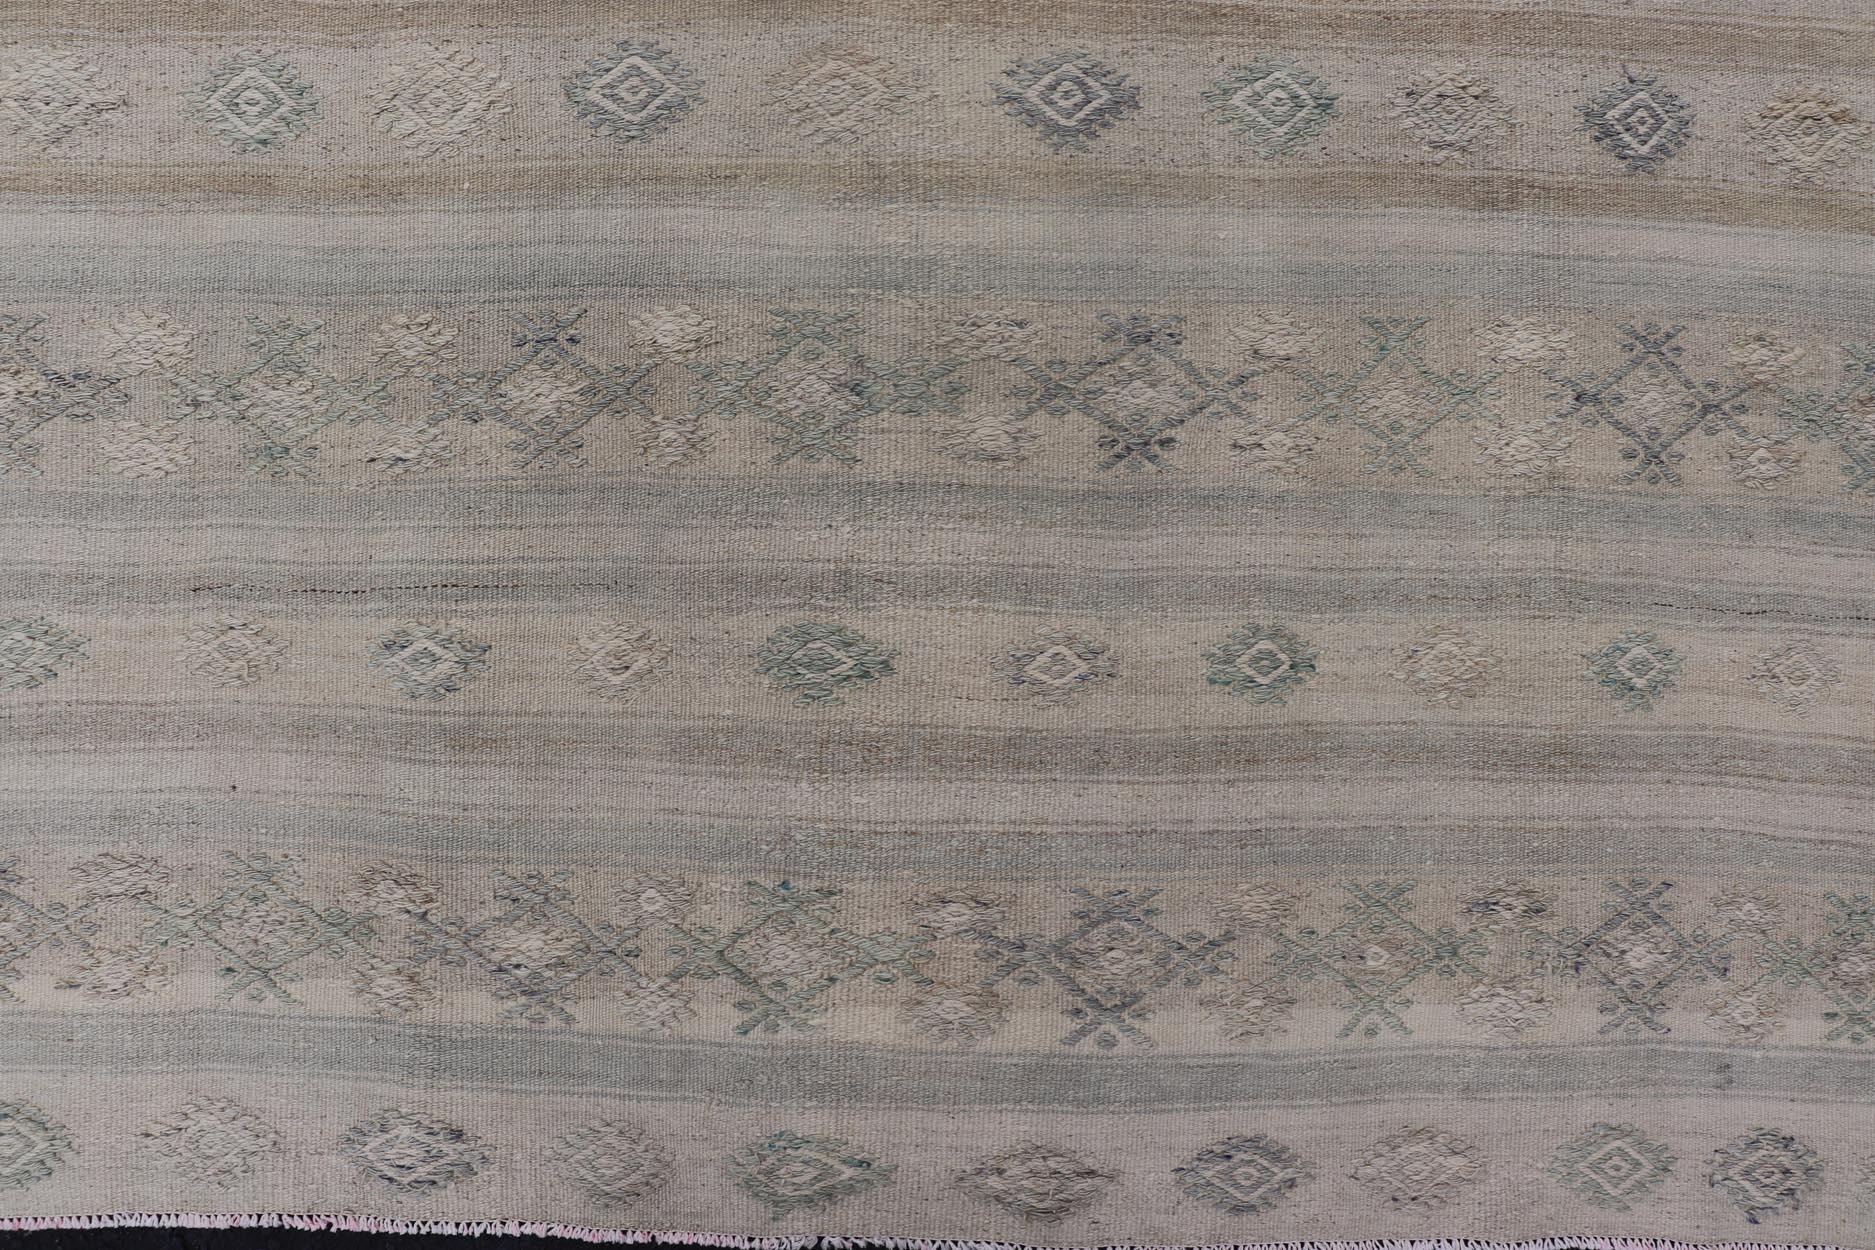 Hand-Knotted Turkish Vintage Gallery Flat-Weave Kilim With Stripes and Embroideries For Sale